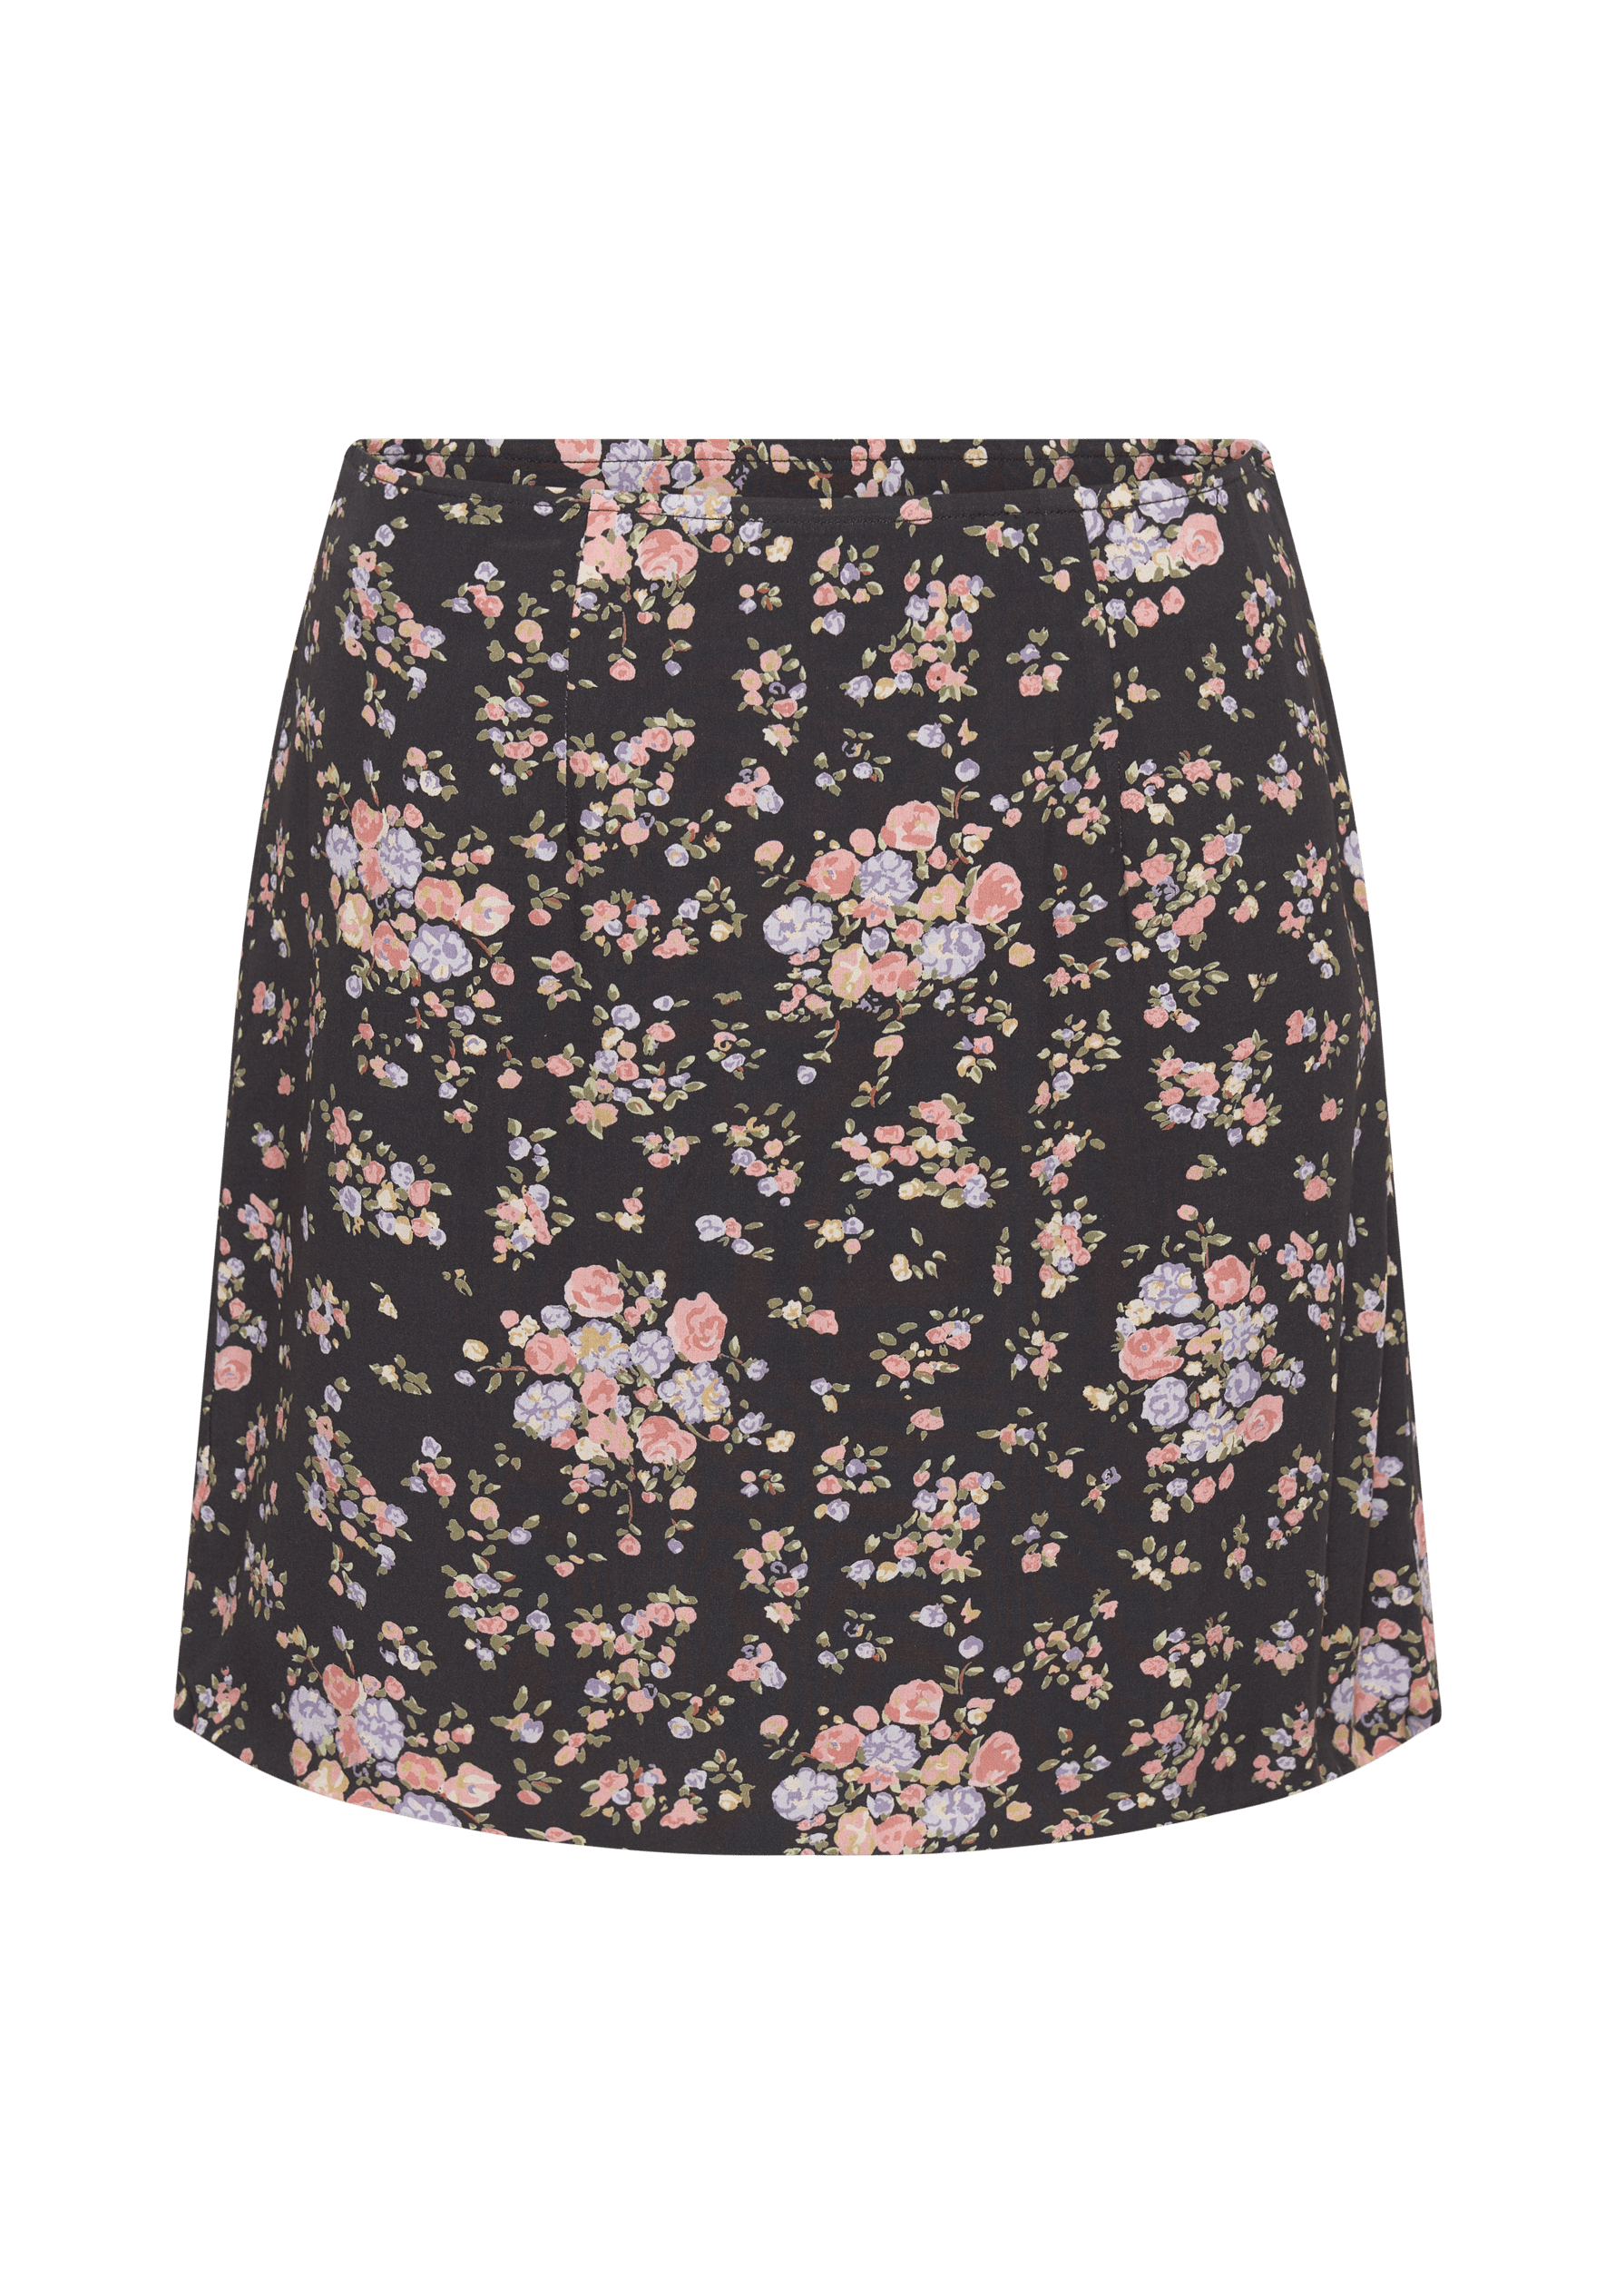 Womens' Summer Skirts - Vintage Inspired - Auguste The Label